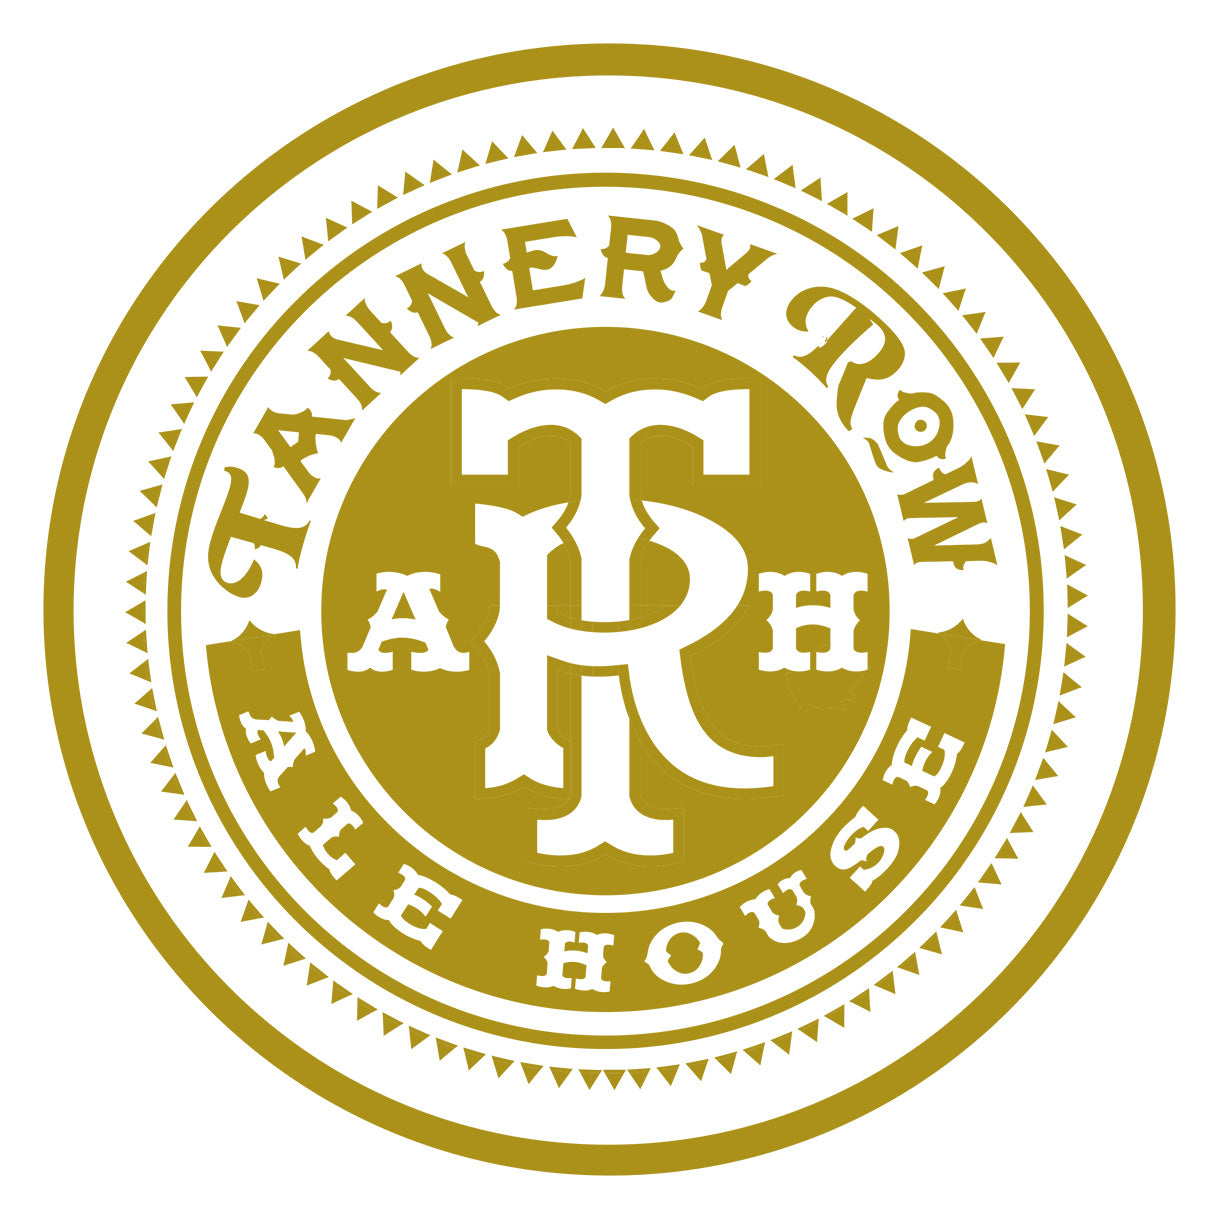 Monday Dance Lessons at Tannery Row Ale House